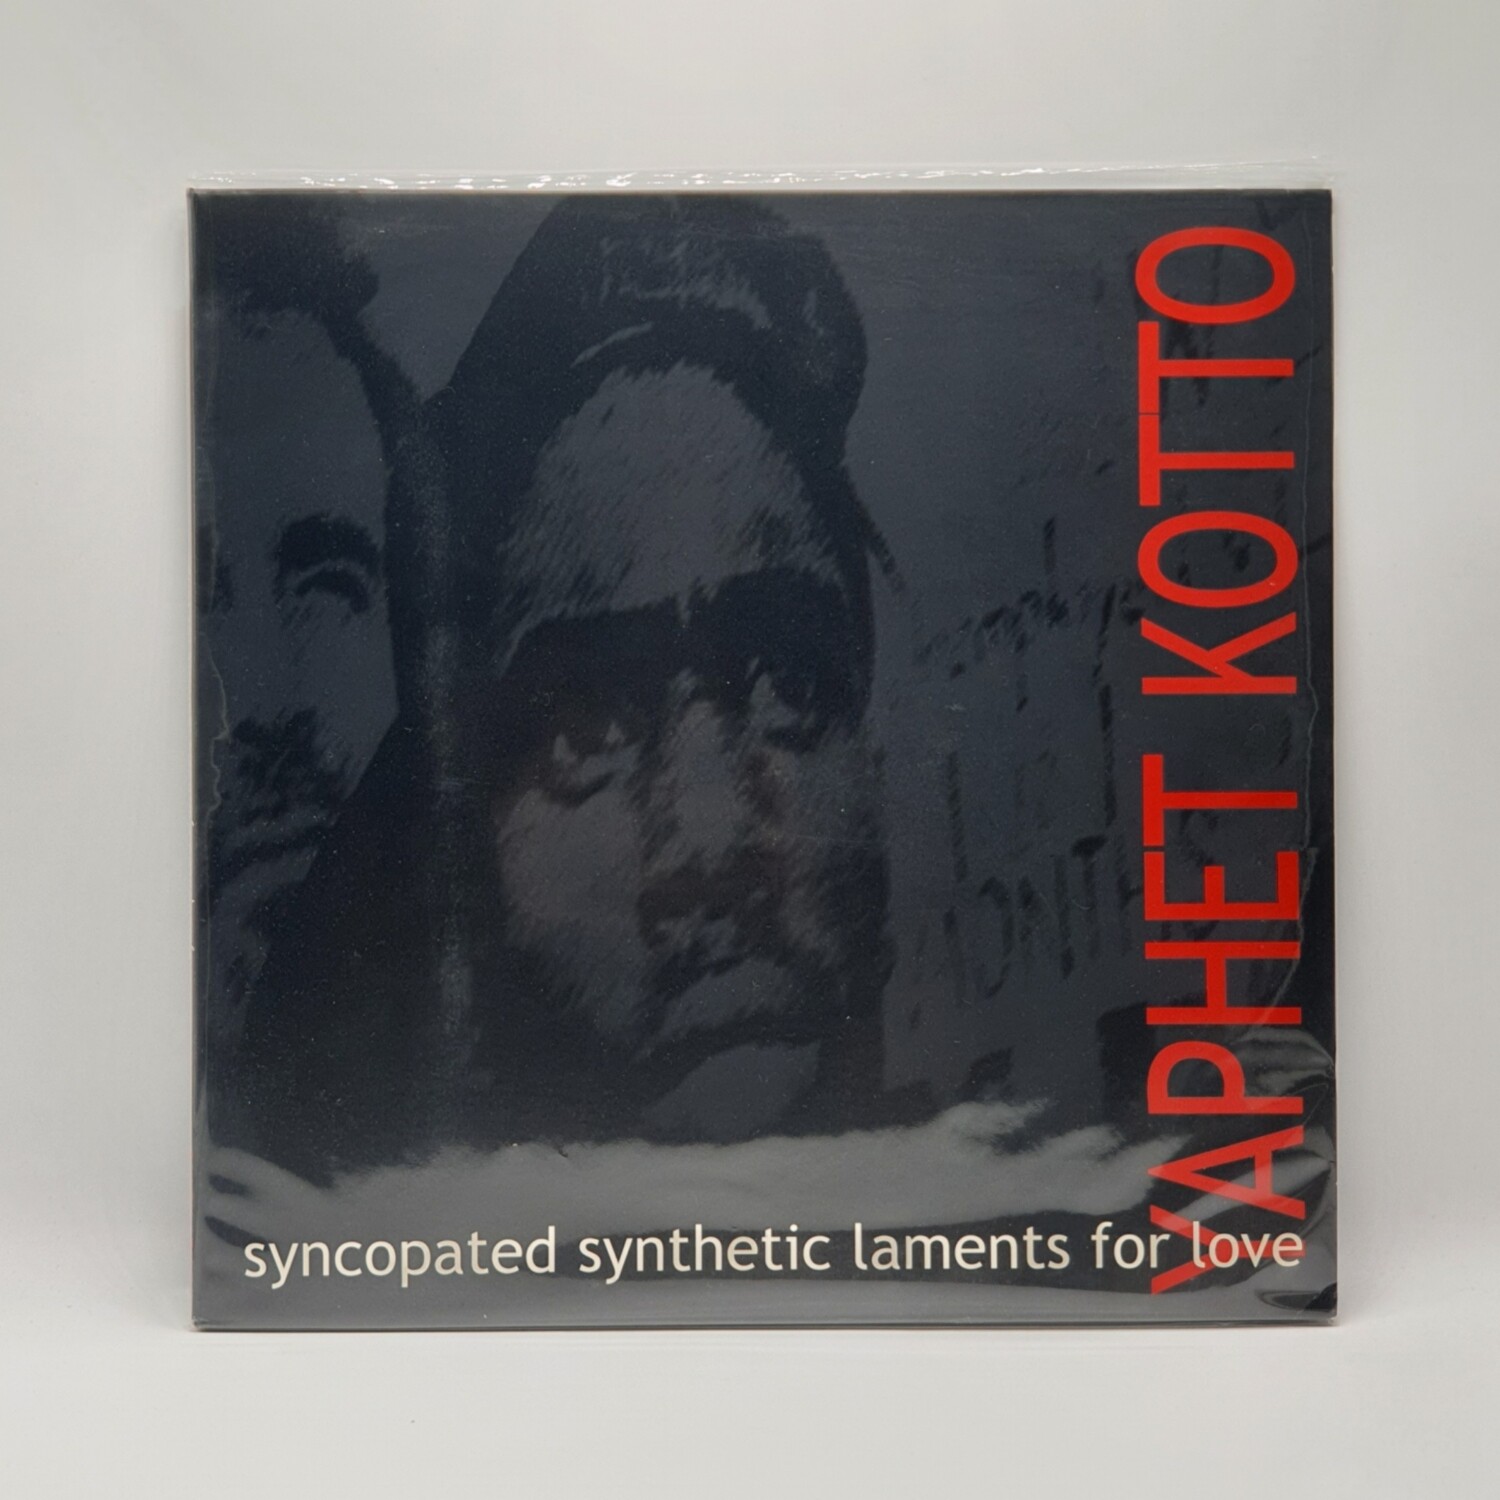 [USED] YAPHET KOTTO -SYNCOPATED SYNTHETIC LAMENTS FOR LOVE- LP